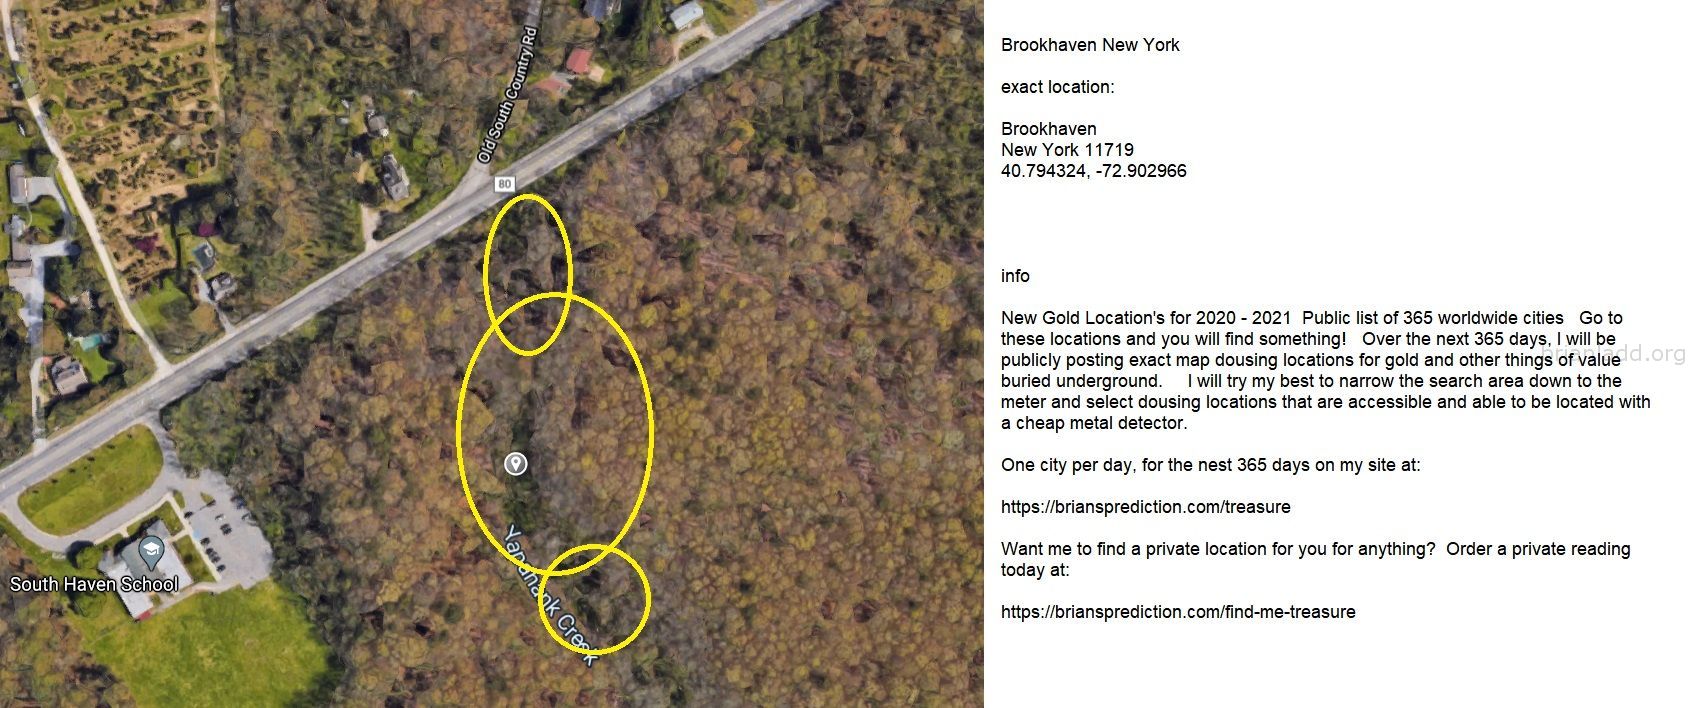 Brookhaven New York gold map 48 by Psychic Brian Ladd
New Gold Location's for 2020 - 2021  Public list of 365 worldwide cities   Go to these locations and you will find something!   Over the next 365 days, I will be publicly posting exact map dousing locations for gold and other things of value buried underground.     I will try my best to narrow the search area down to the meter and select dousing locations that are accessible and able to be located with a cheap metal detector. One city per day, for the nest 365 days on my site at:  https://briansprediction.com/treasure  Want me to find a private location for you for anything?  Order a private reading today at:  https://briansprediction.com/find-me-treasure
